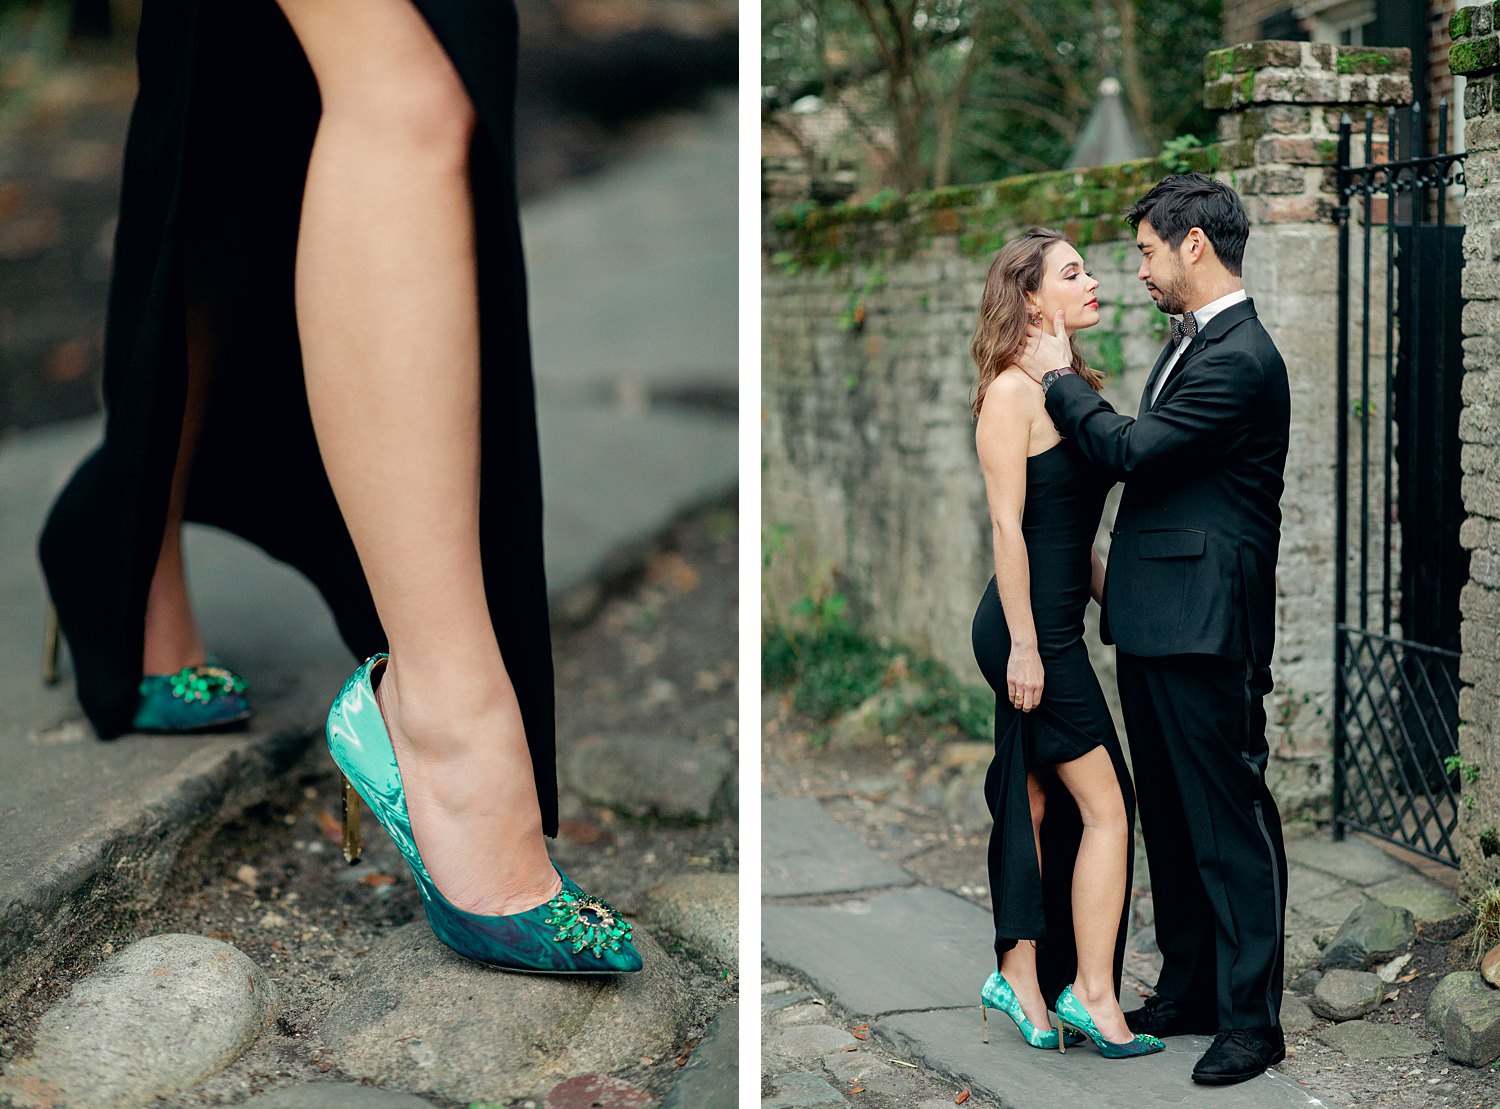 Man in tuxedo standing with woman in black dress and green high heel shoes in cobblestone alley